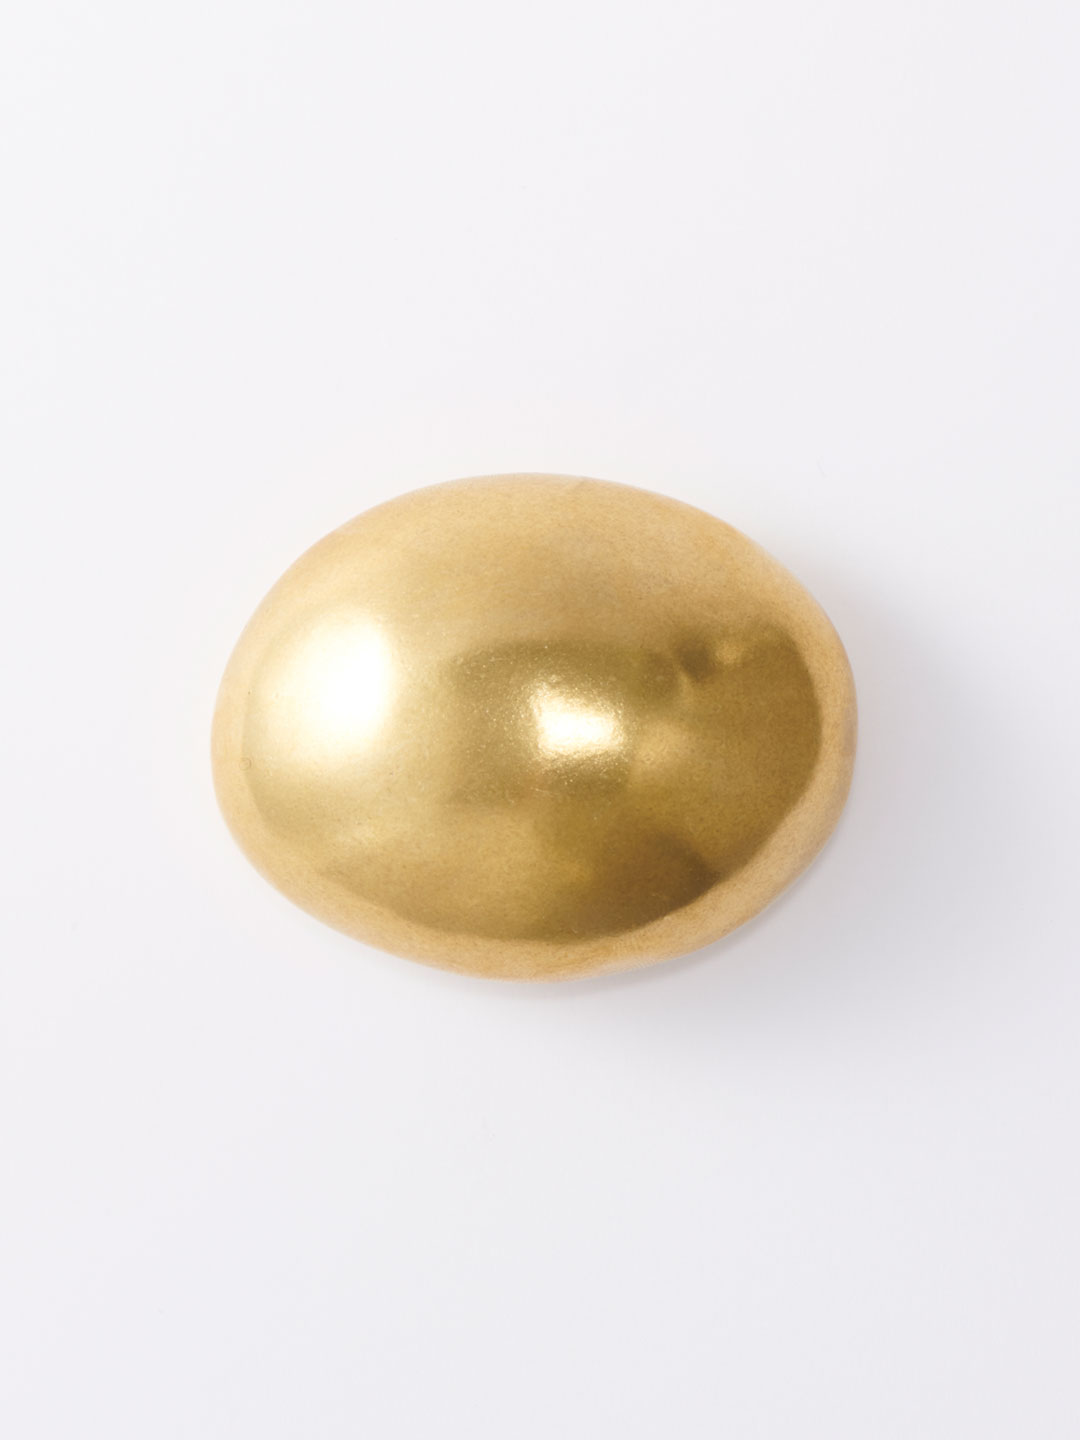 Paper Weight 001 - Gold